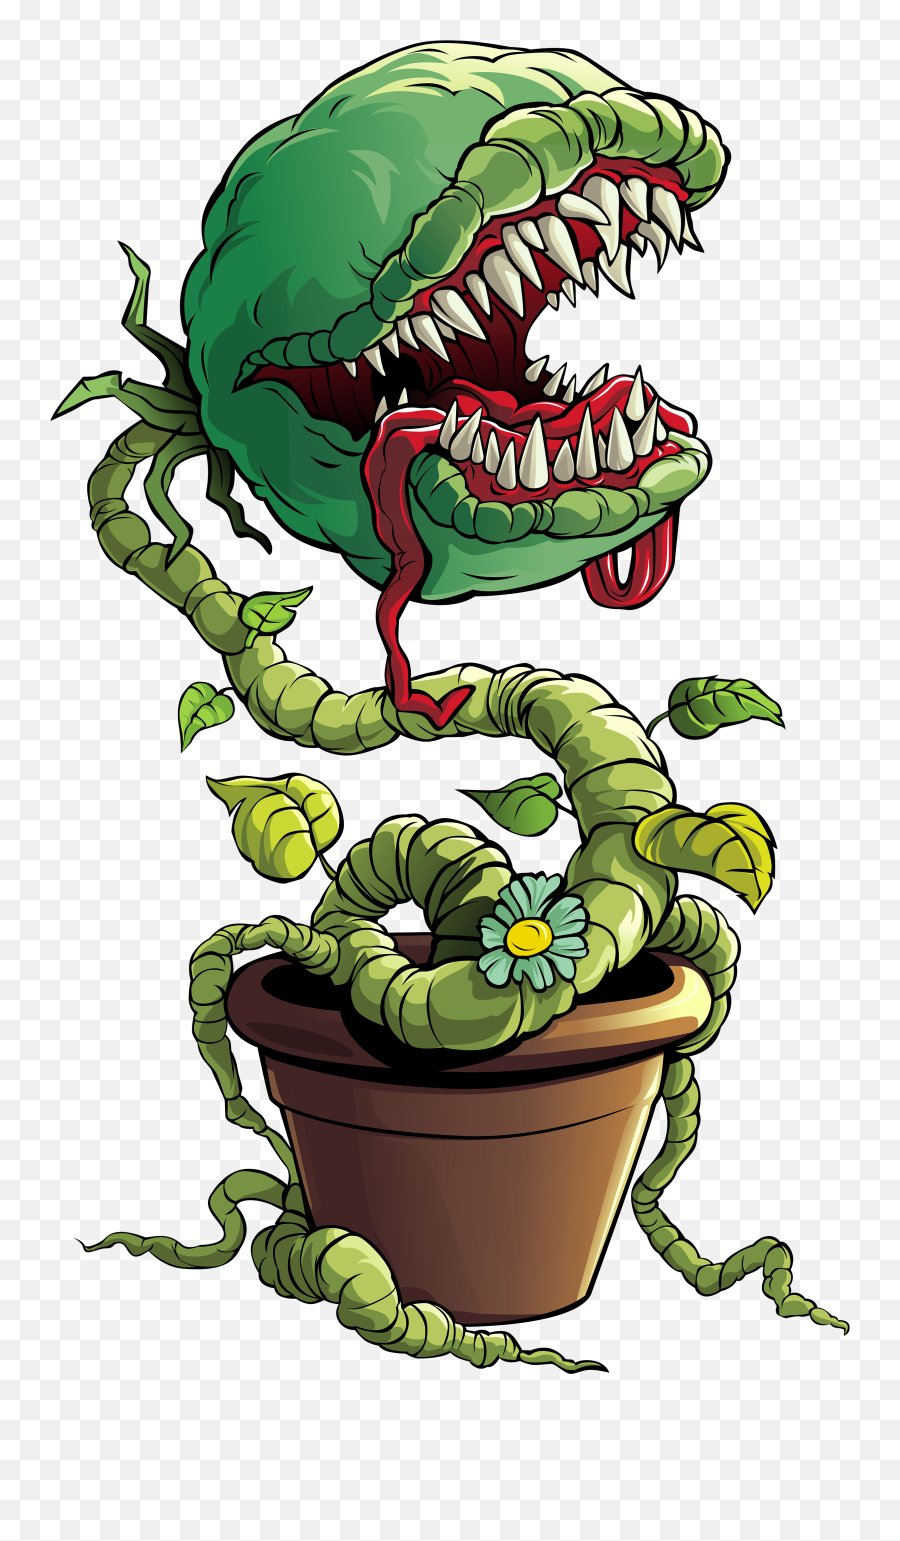 Download Free Png Venus Fly Trap Plant Monster Clip Art - Venus Fly Trap Art,Plant Cartoon Png